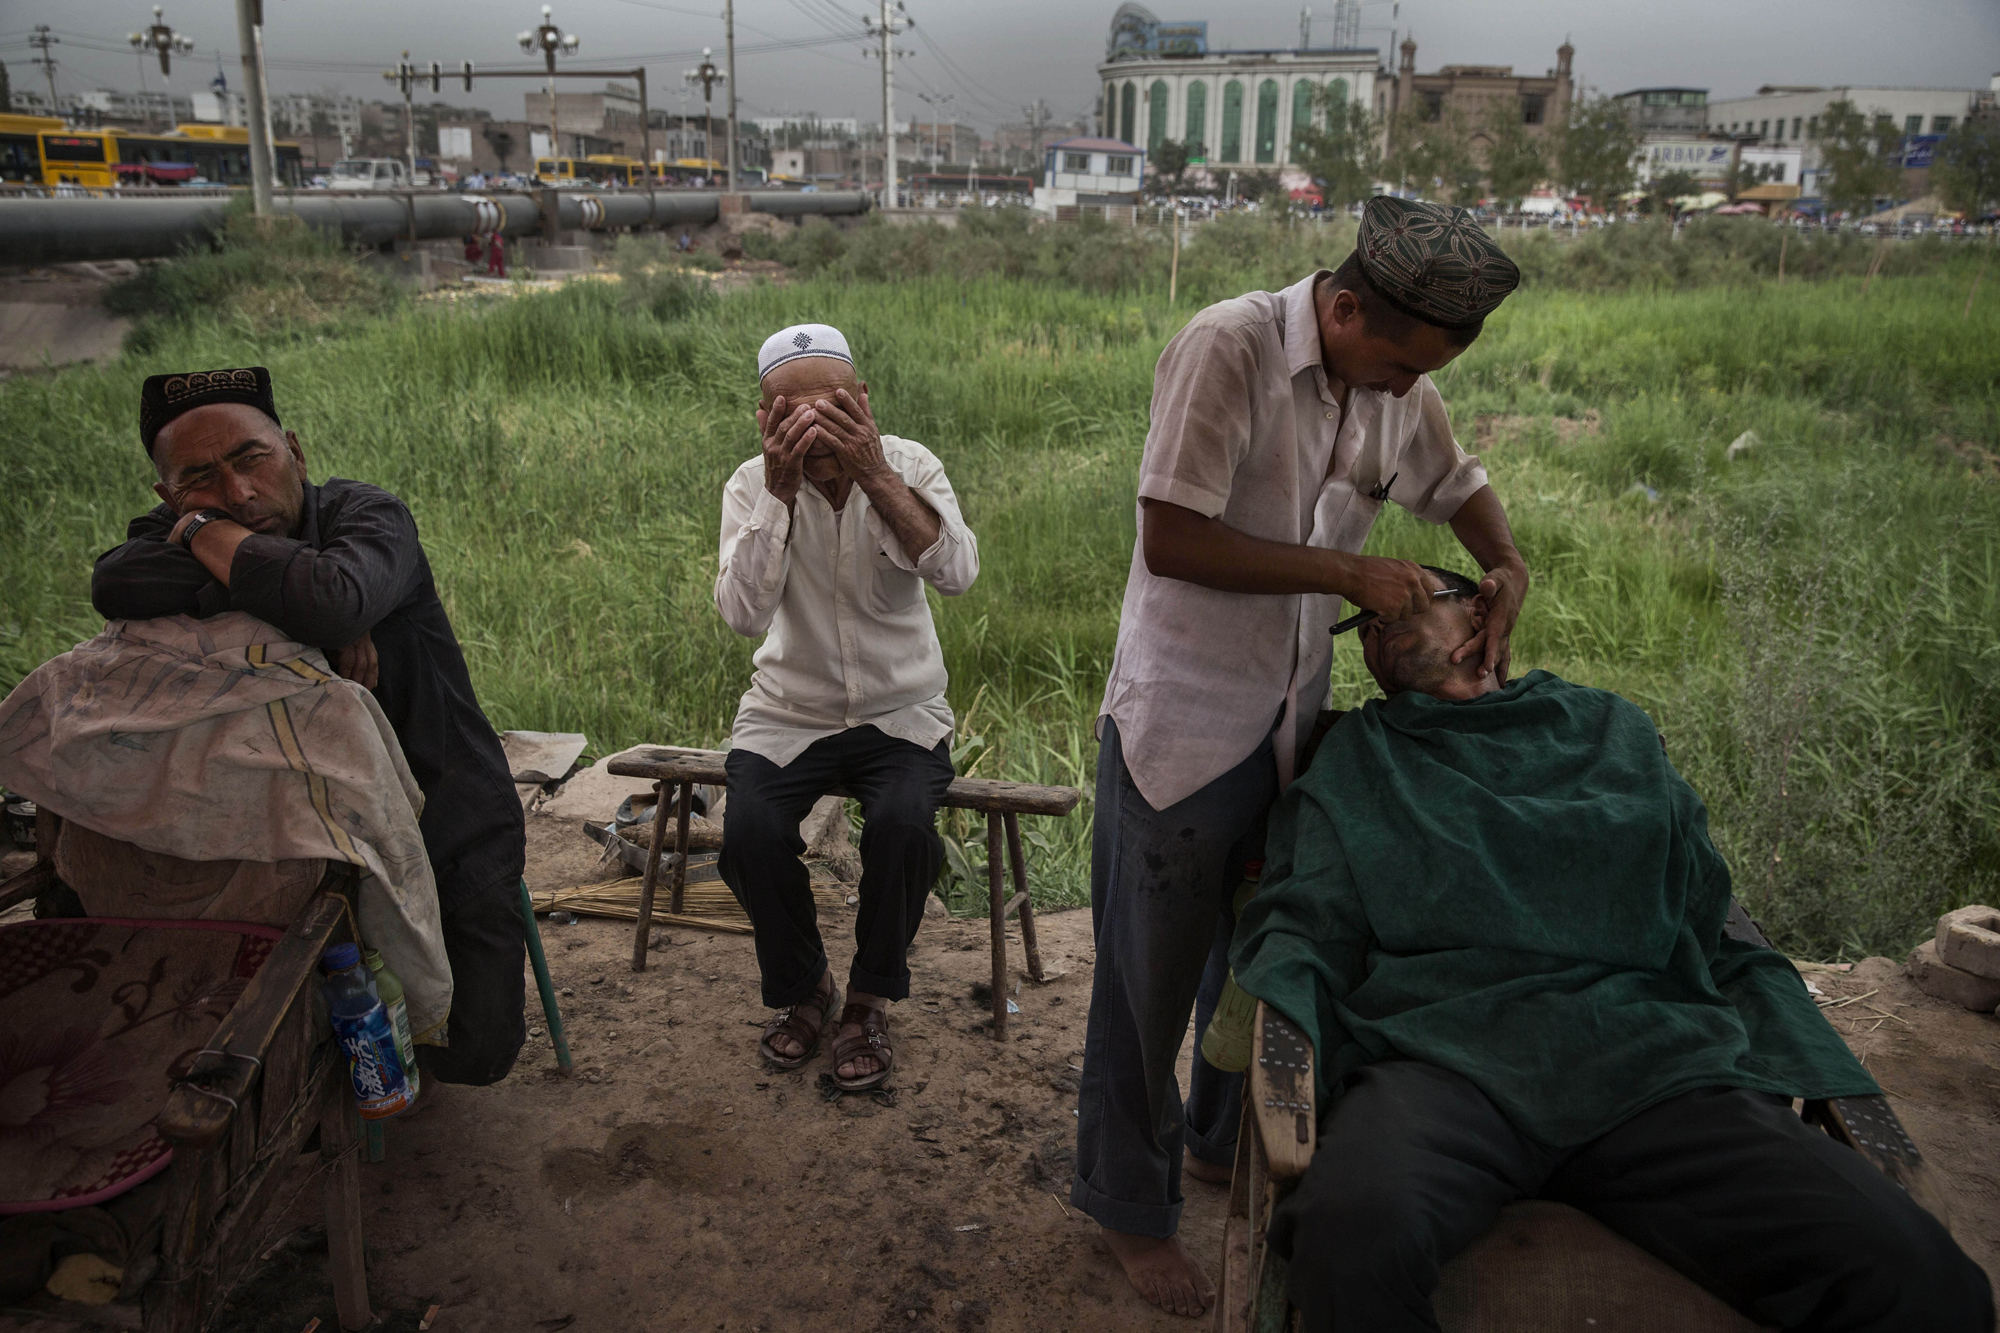 A Uyghur shaves a customer at an outdoor stall before the Eid holiday on July 28, 2014 in old Kashgar.